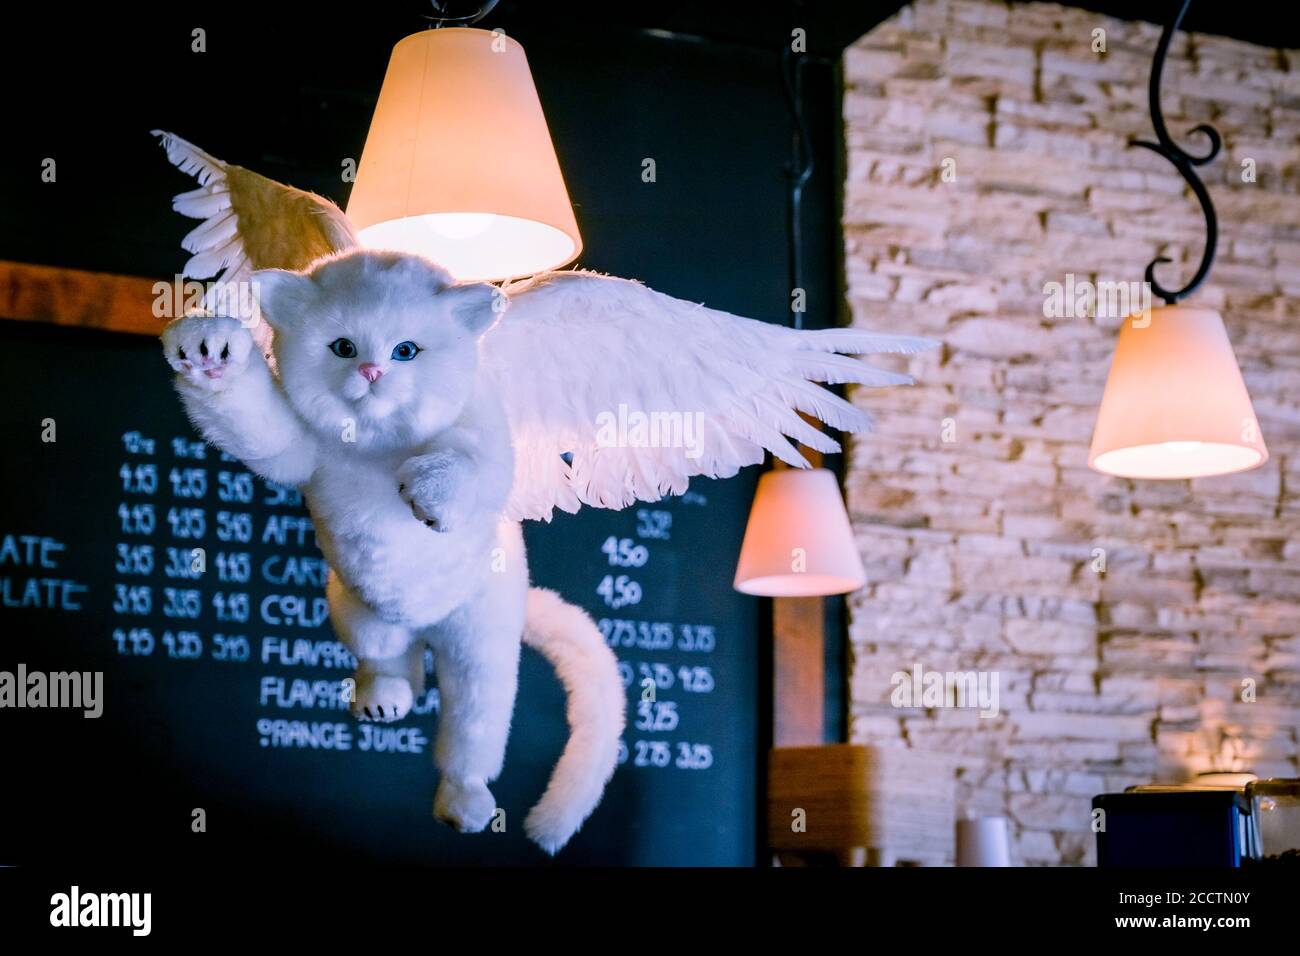 Winged cat, Artistry Coffee House and Bistro, Kitsilano, Vancouver, British Columbia, Canada Stock Photo